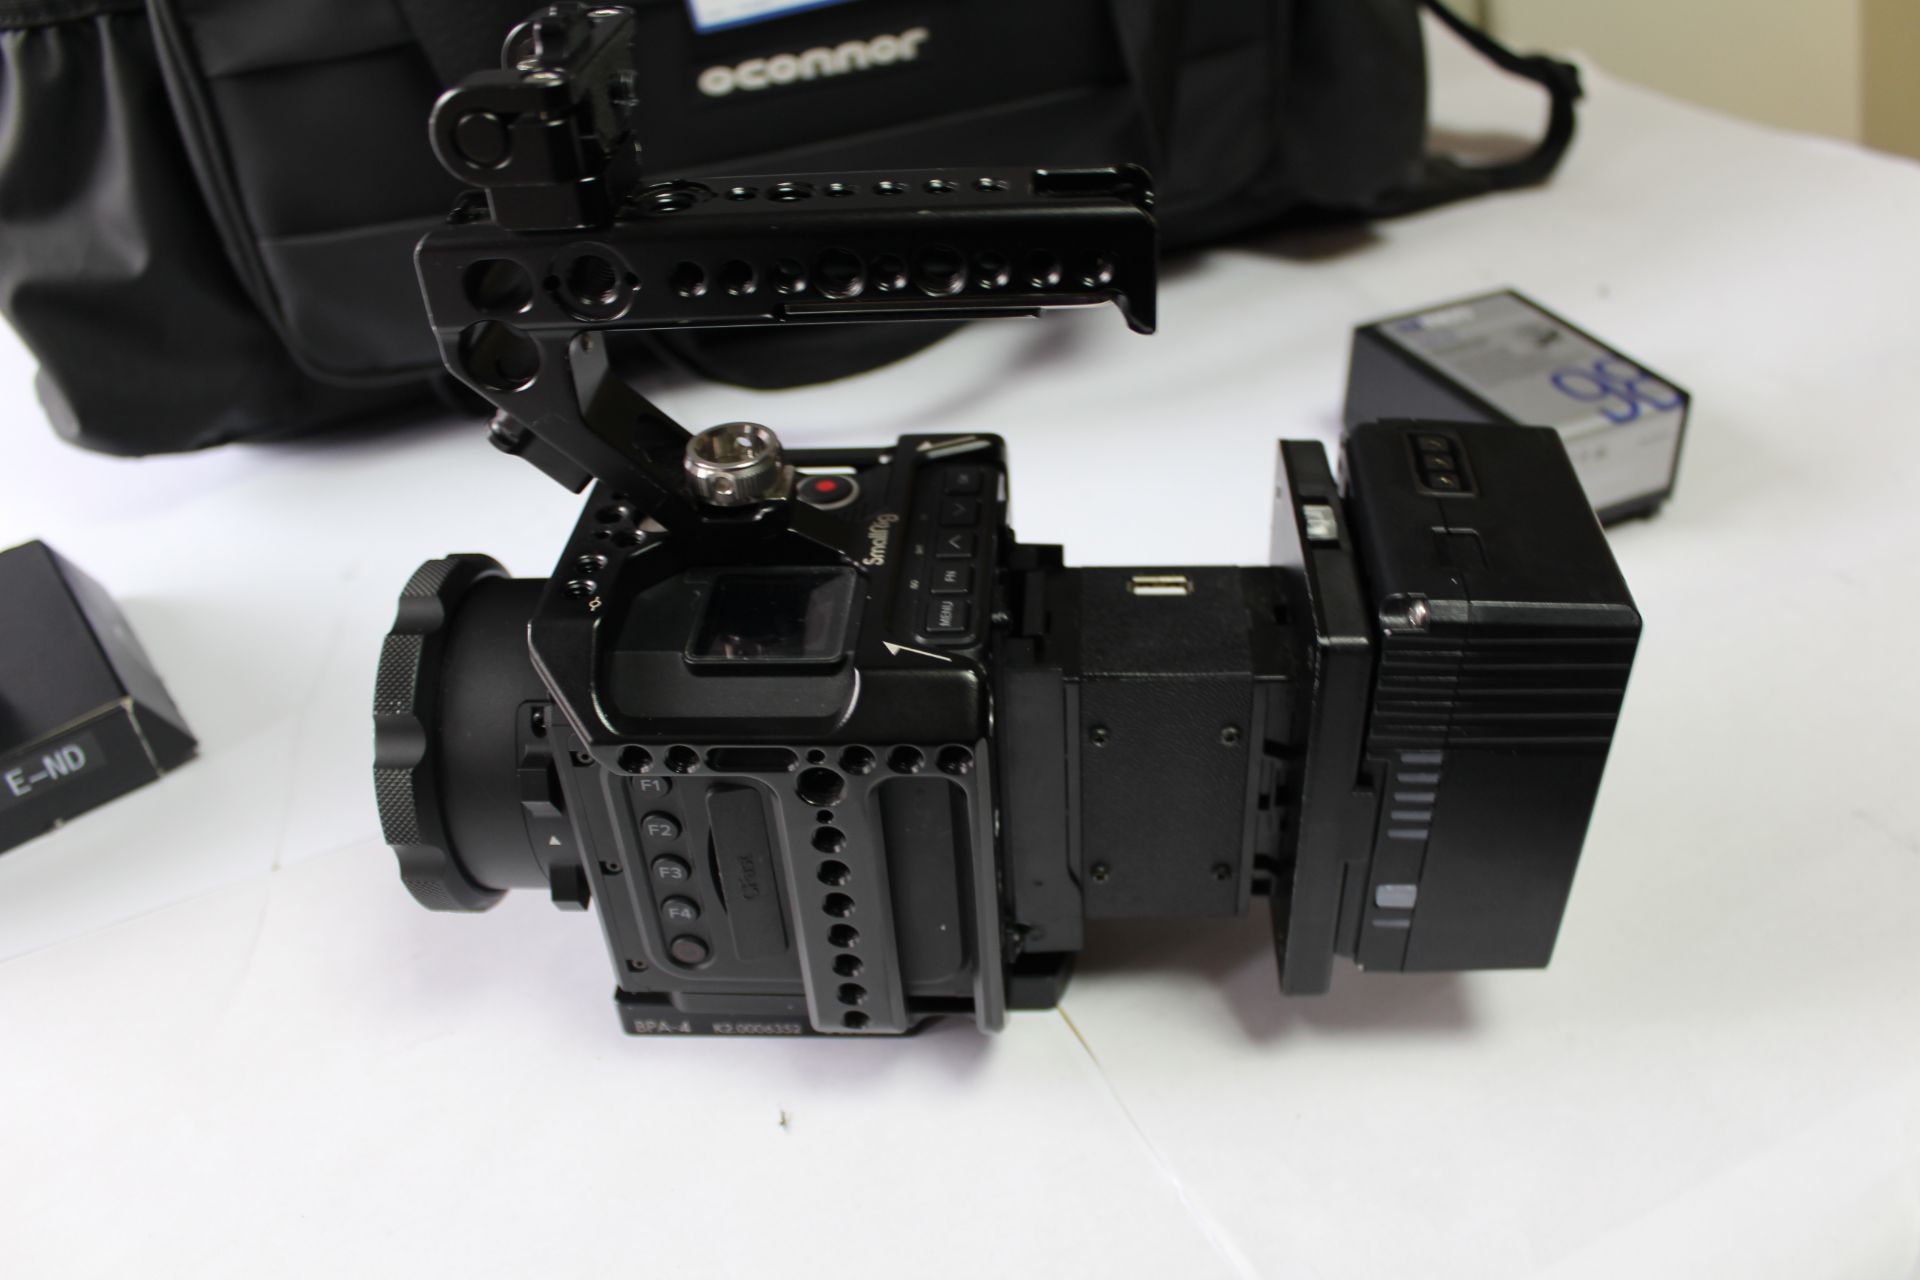 Z Cam E2-F6 Camera Body with 2 Batteries, Accessories and Carry Bag - Image 2 of 3